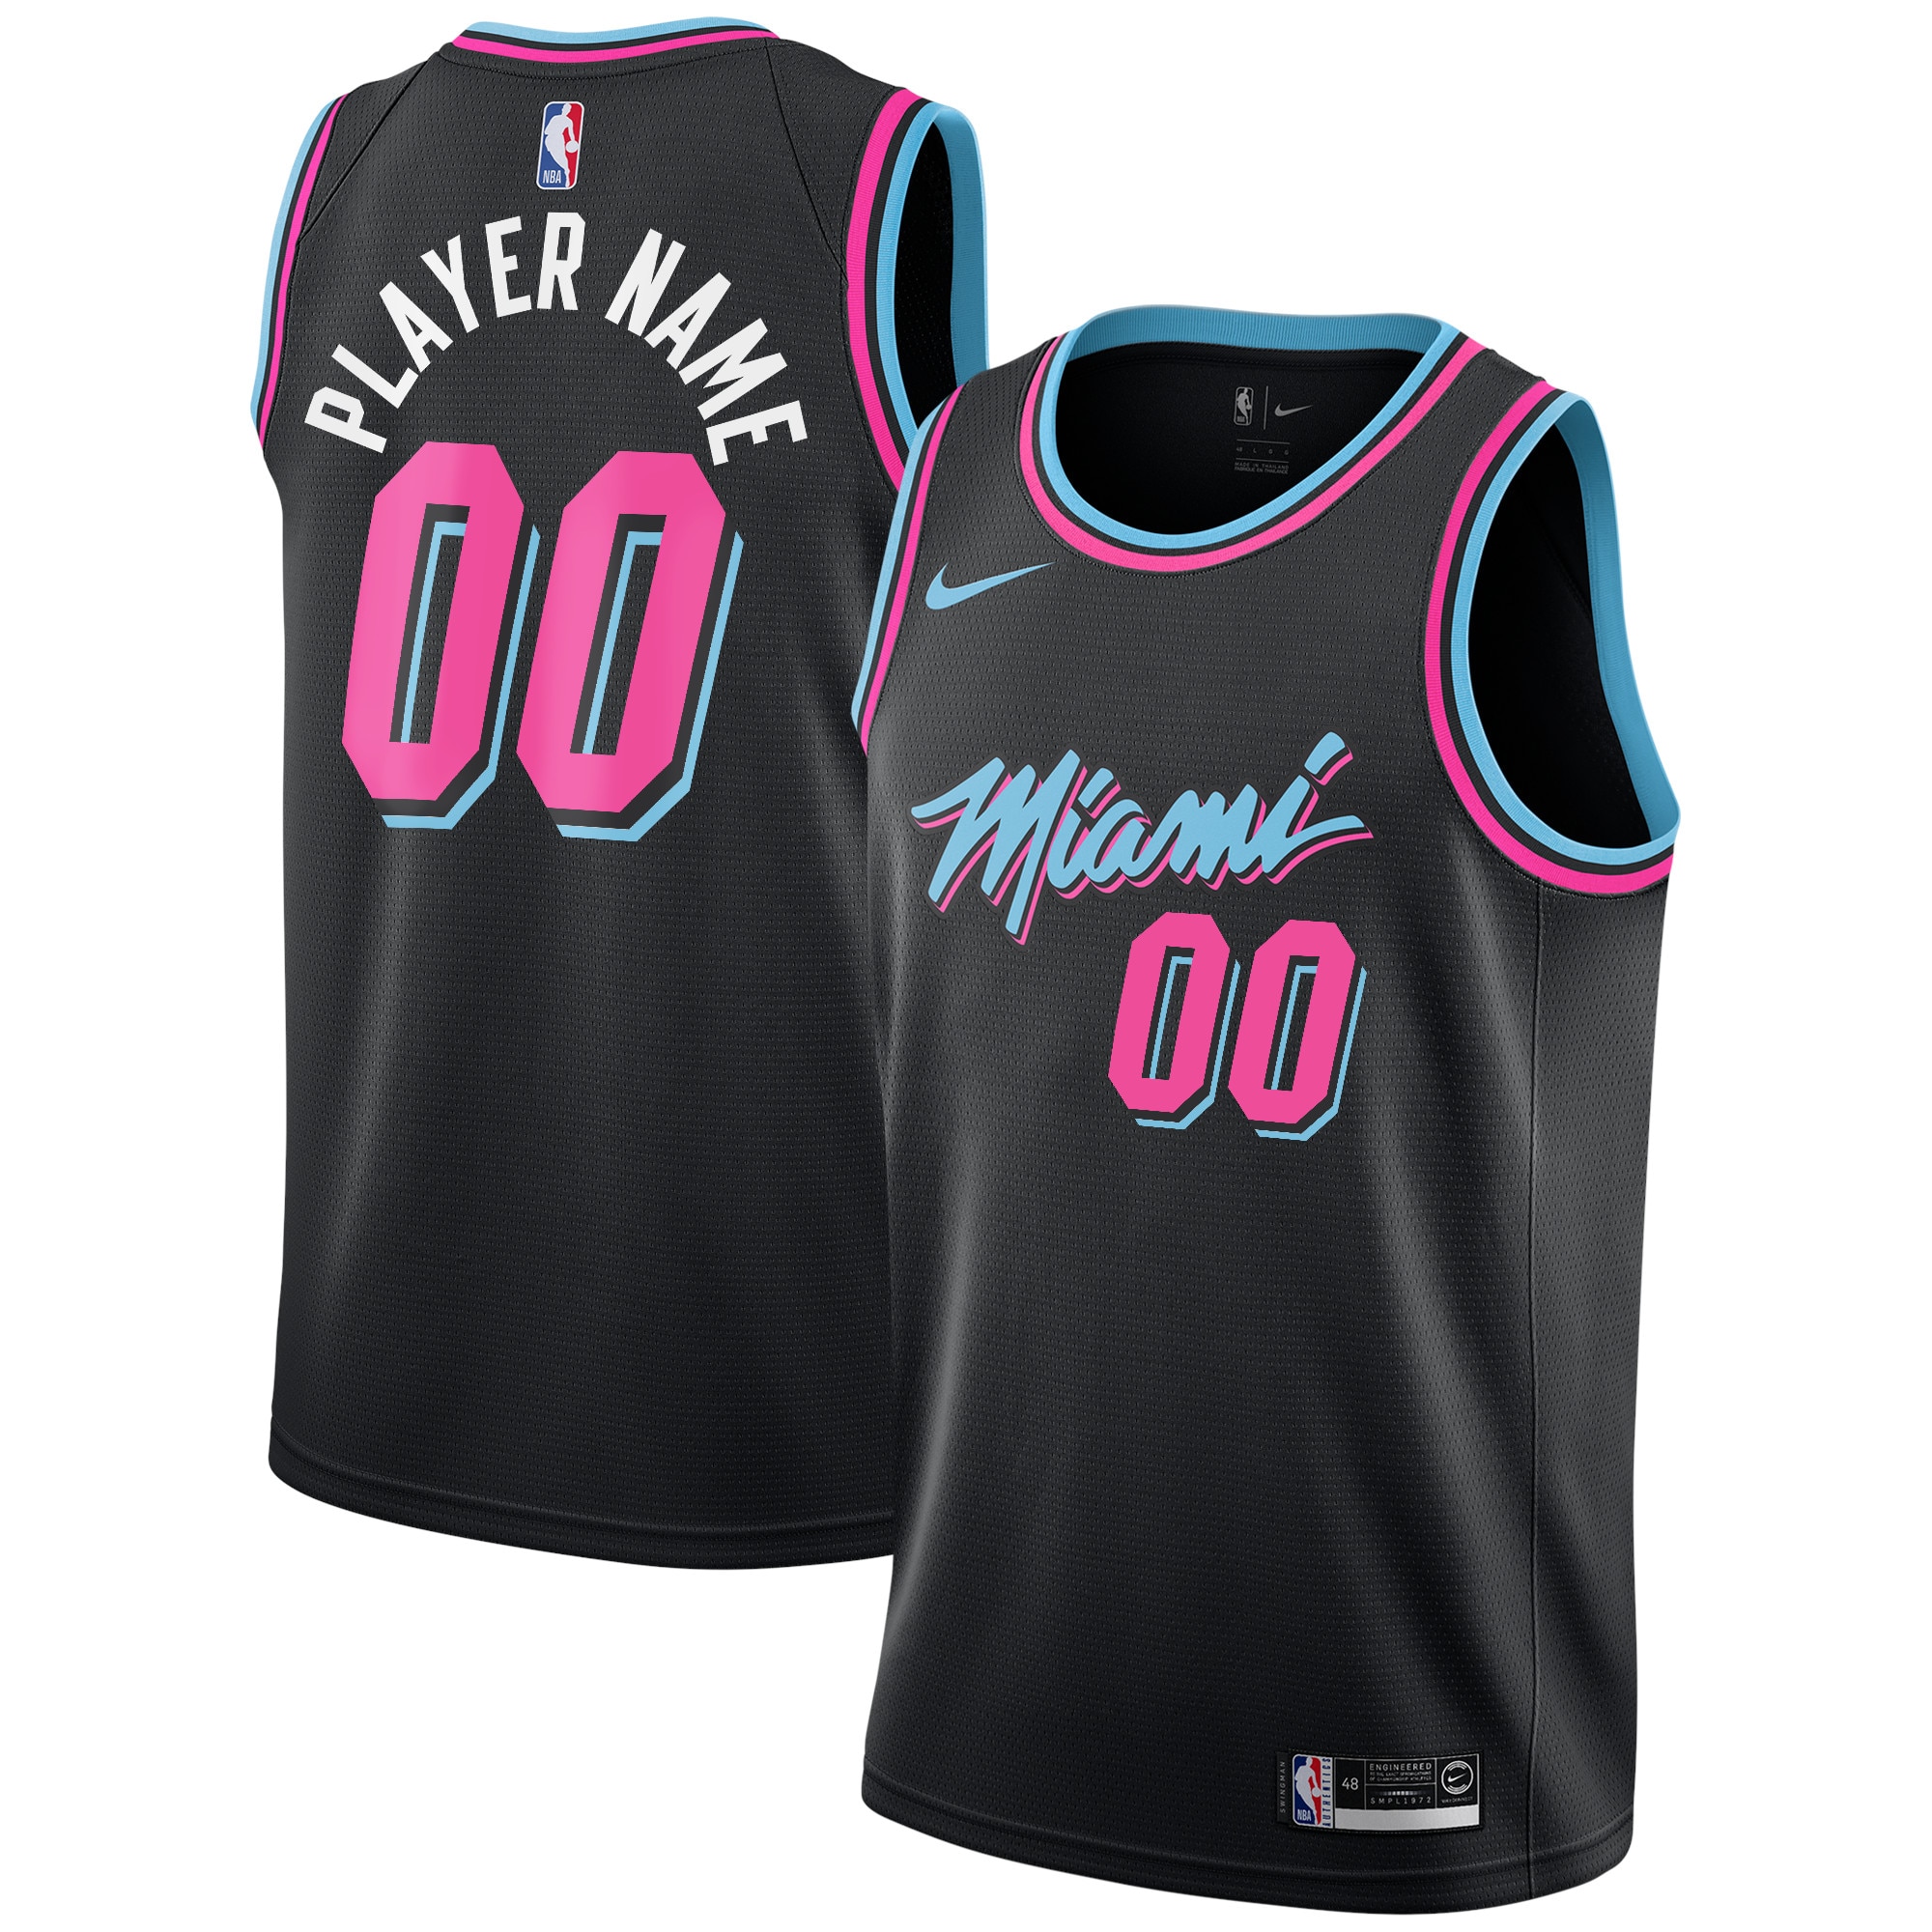 where can i buy a miami heat jersey